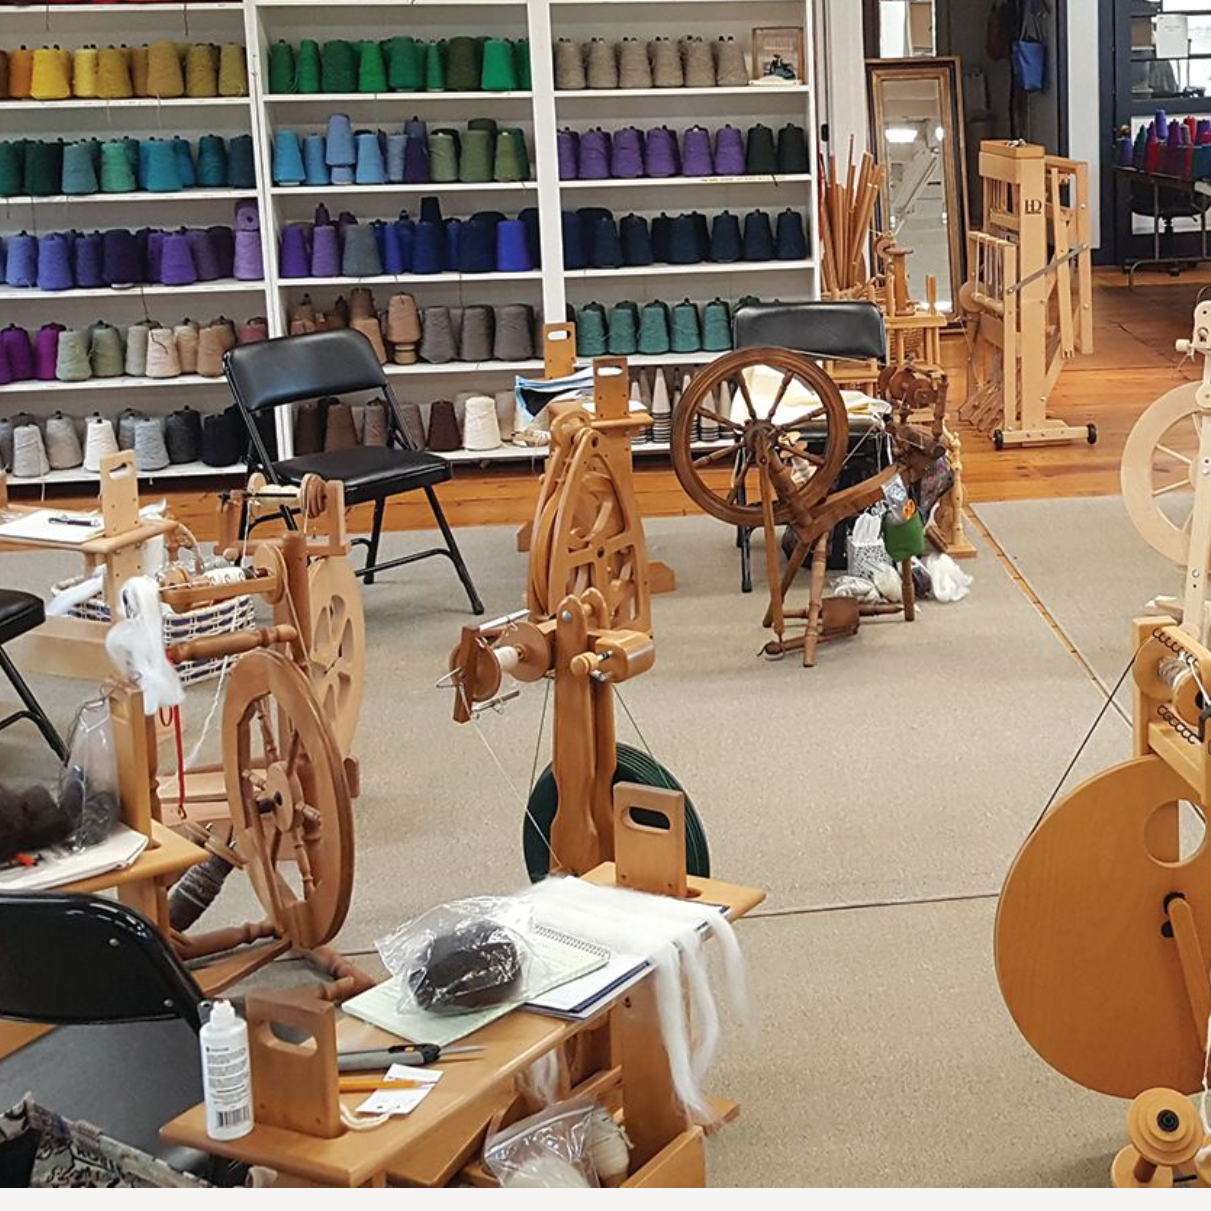 Spinning: From Fleece to Skein with Donna Kay (JUN 27-29)